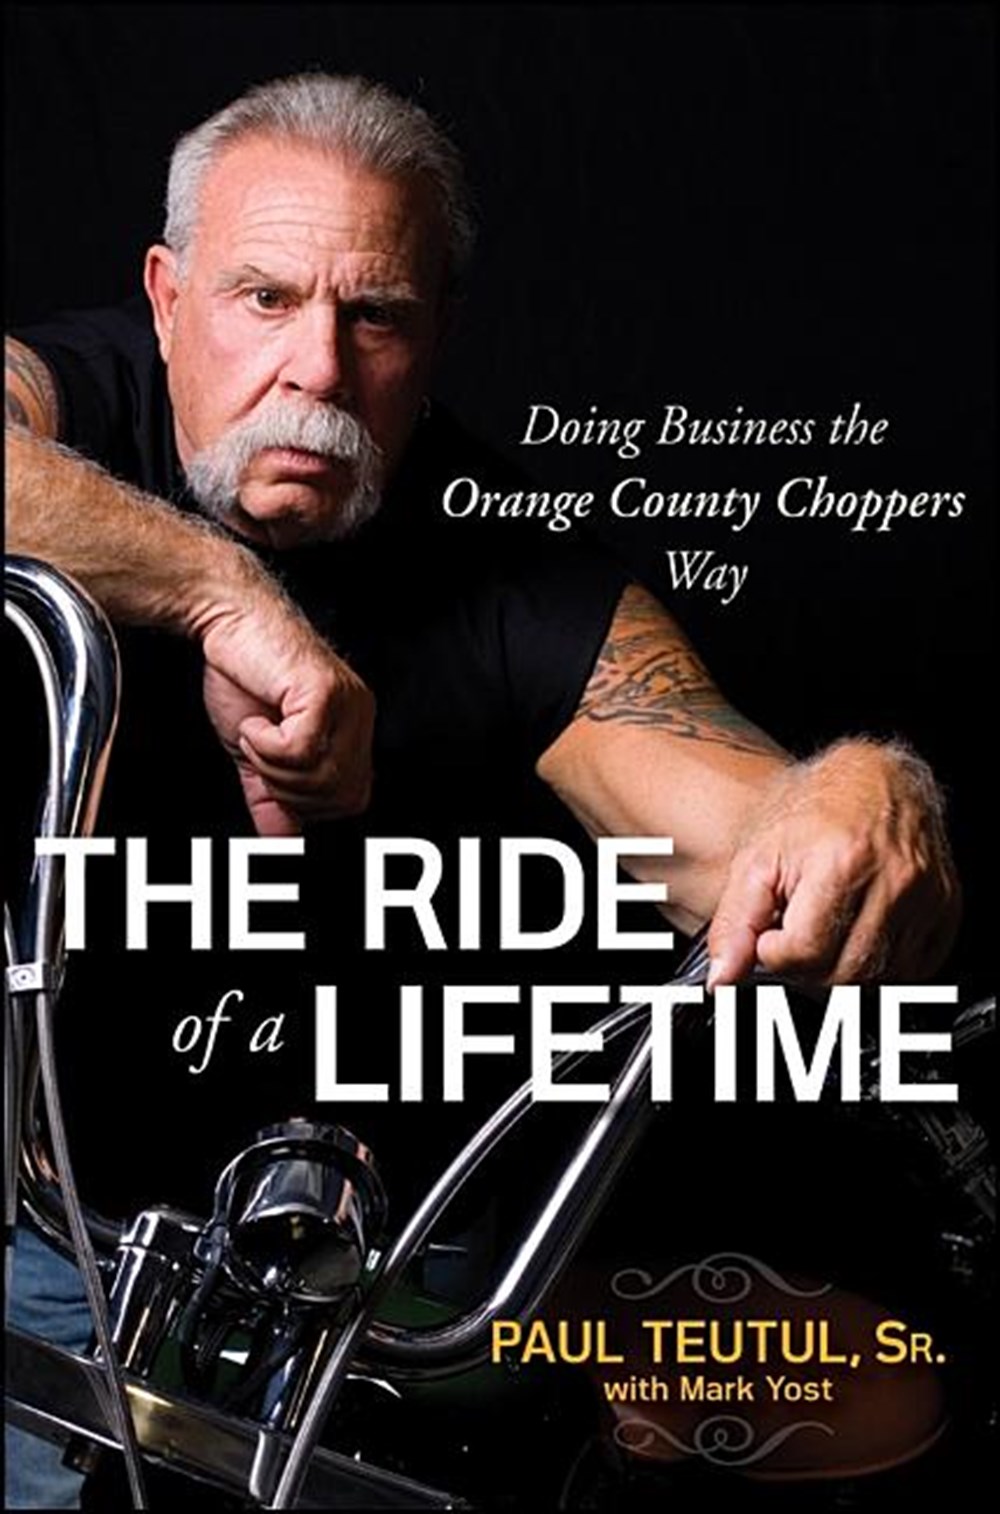 Ride of a Lifetime: Doing Business the Orange County Choppers Way